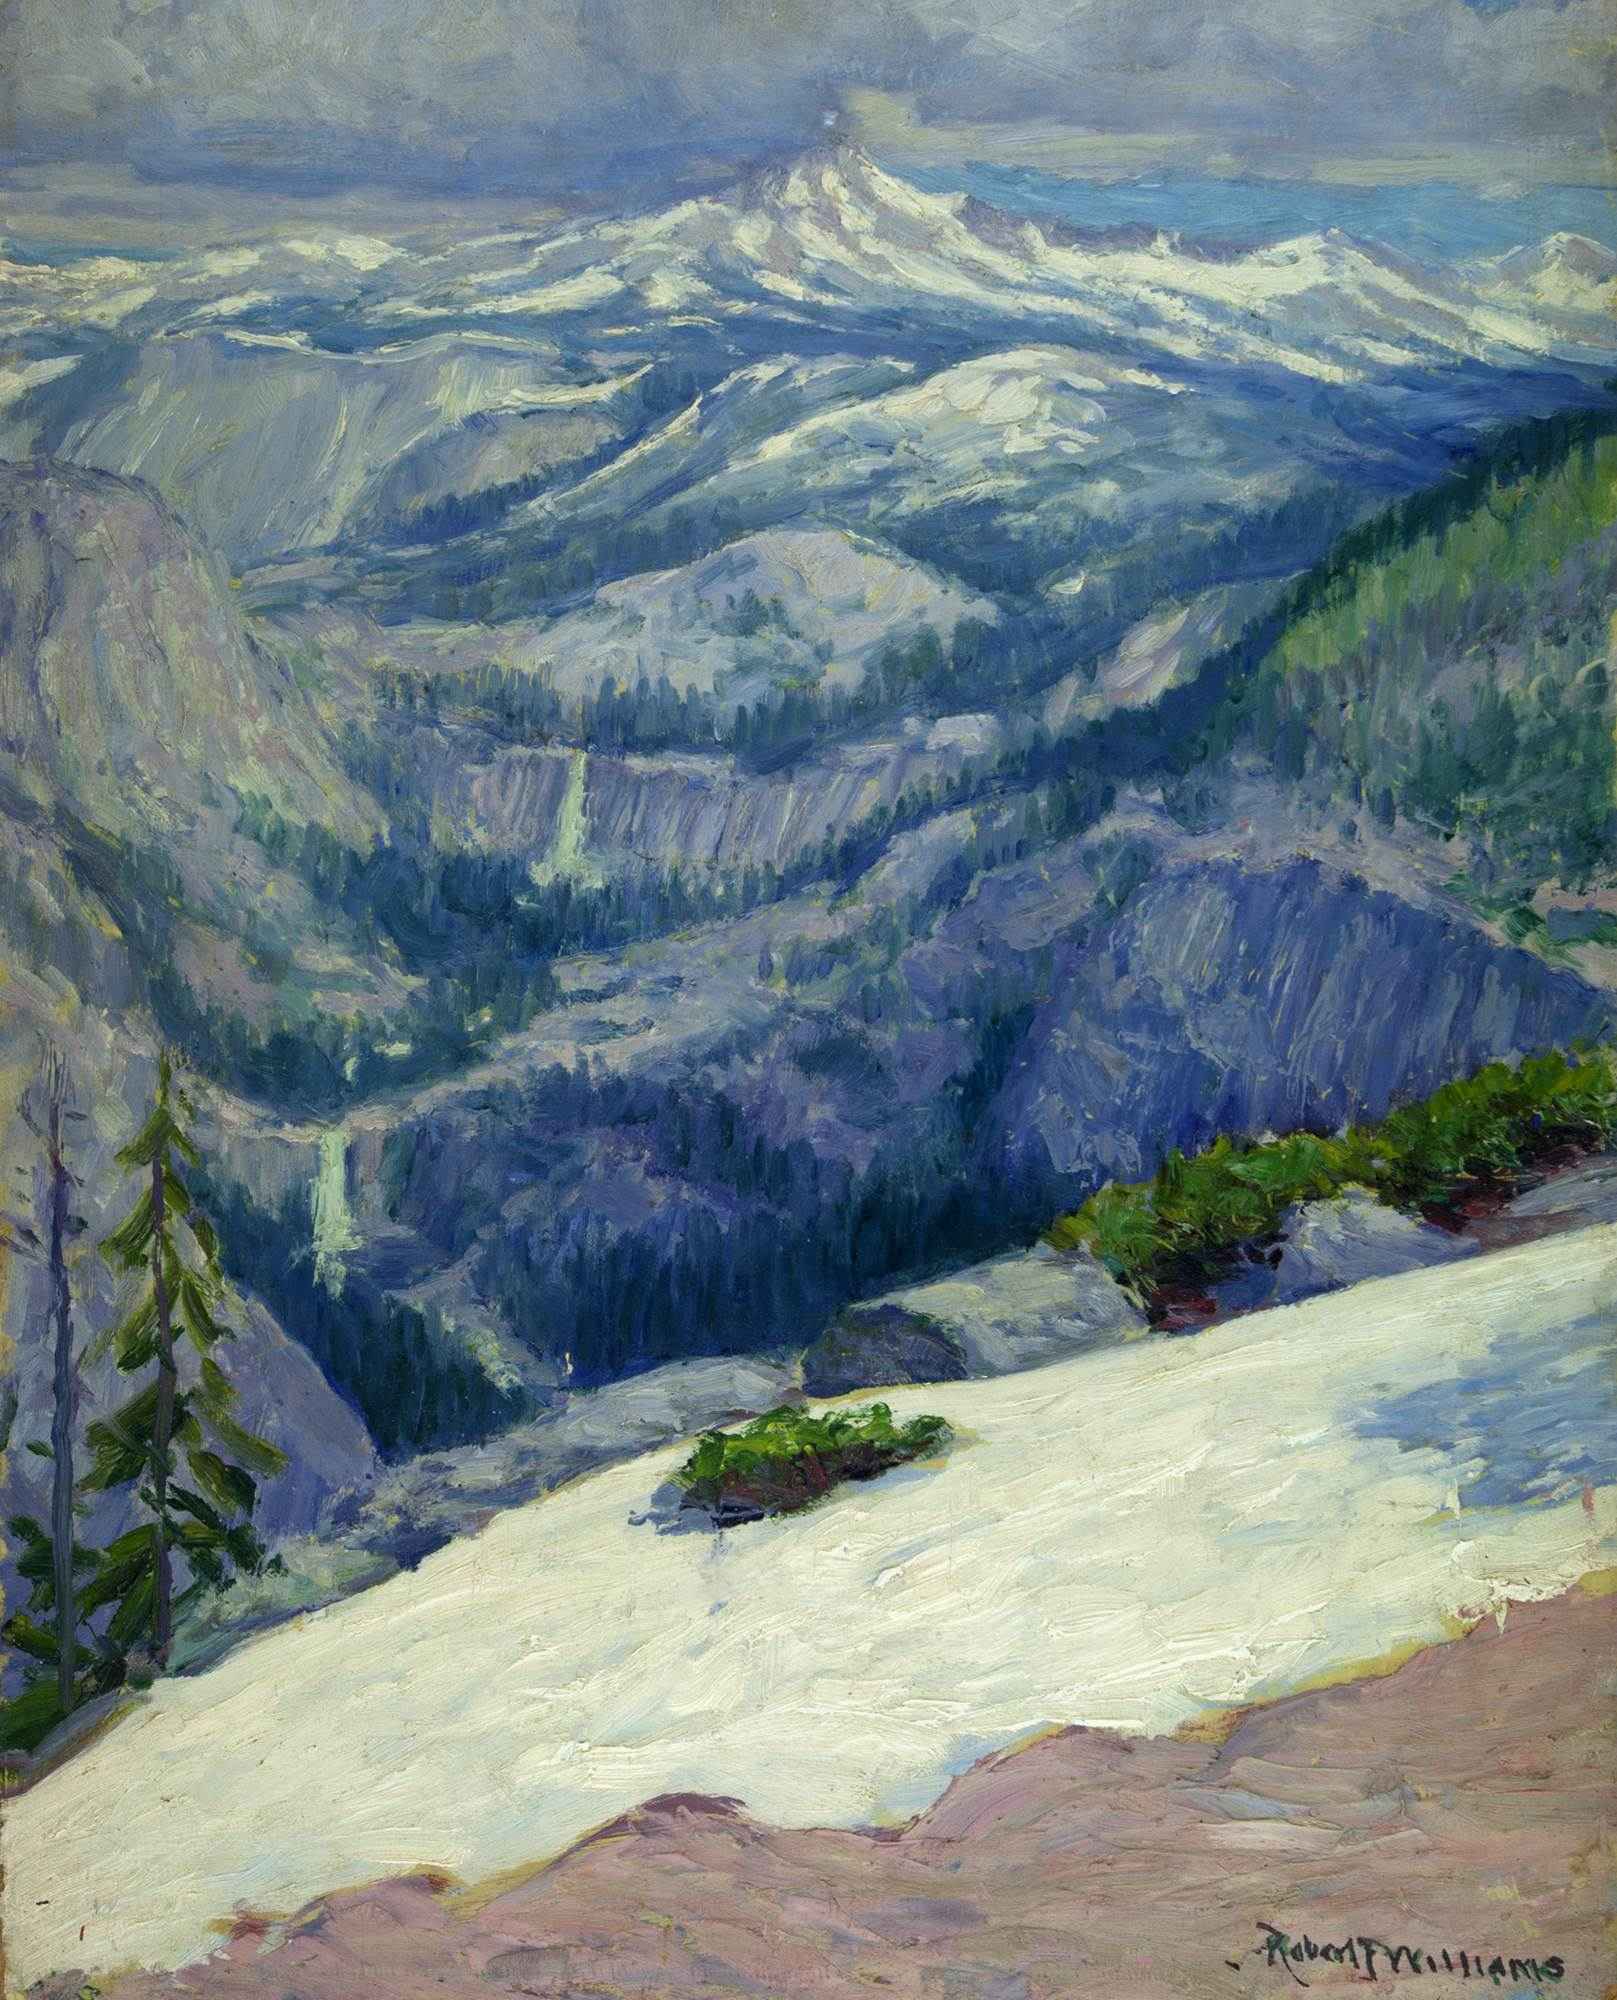 Painting From Glacier Point, Vernal and Nevada Falls - High Sierras